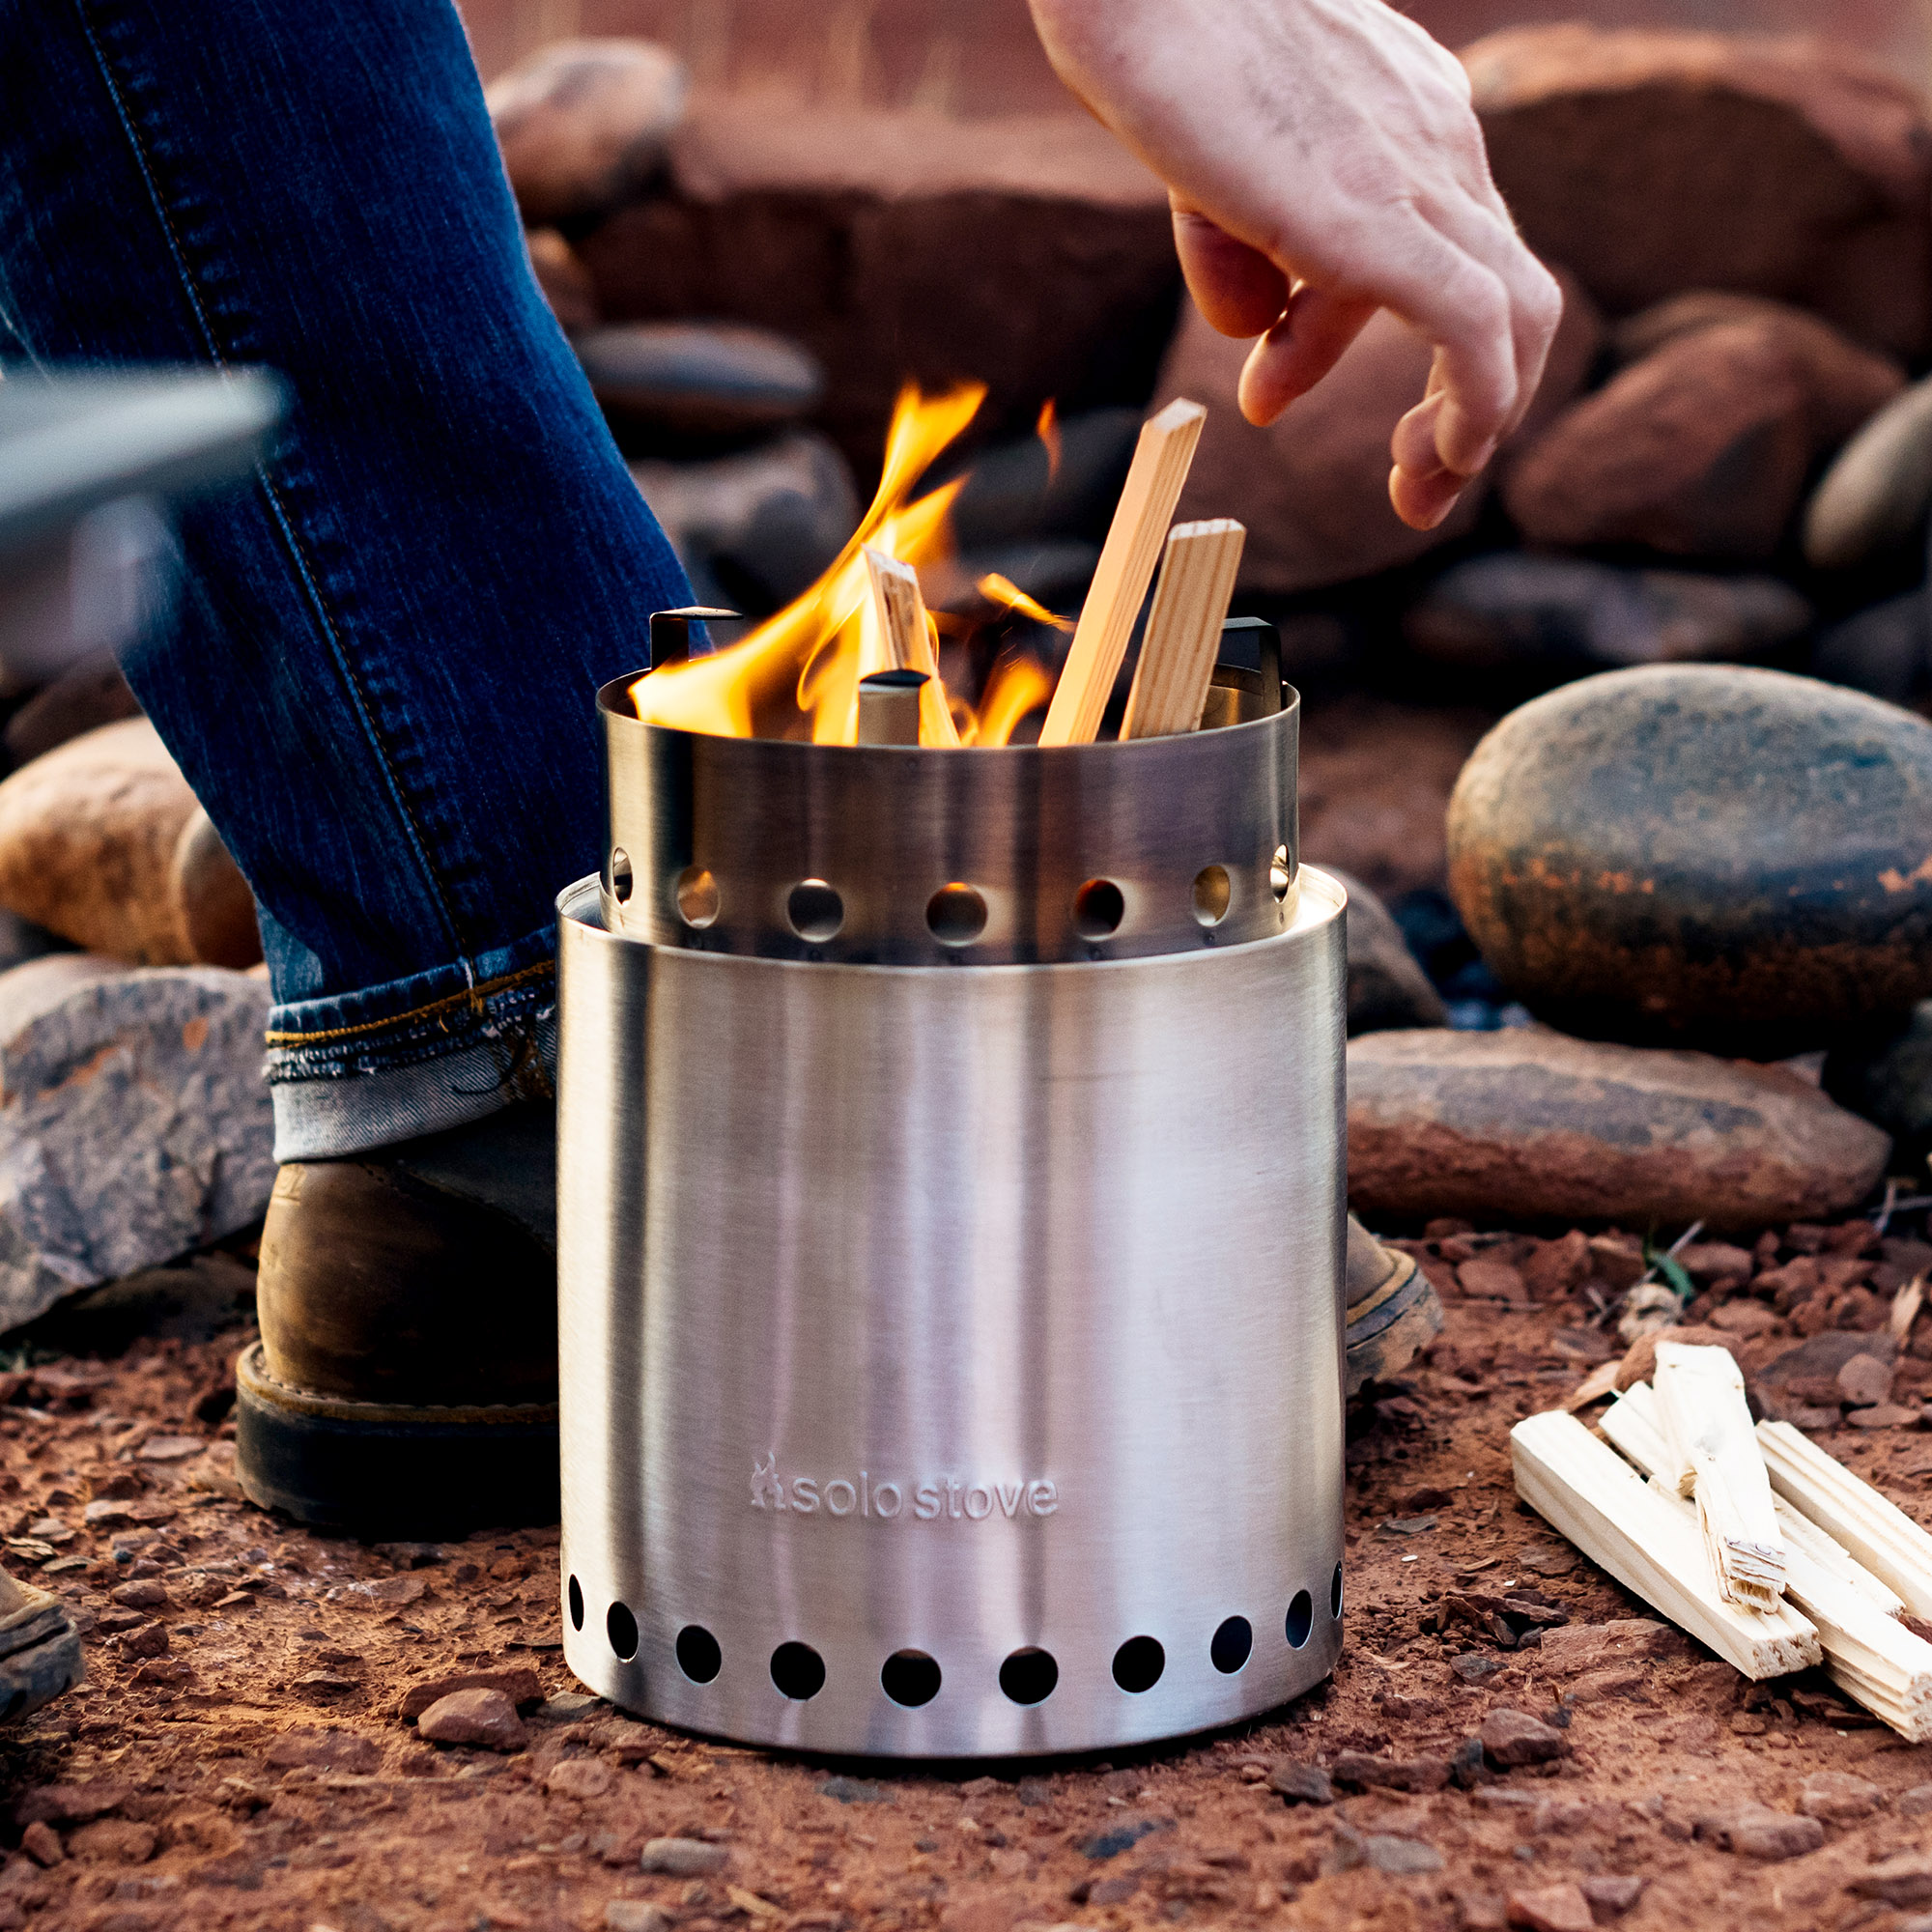 Solo Stove Campfire, Portable Camping Hiking, Backpacking and Survival Stove, Powerful Efficient Wood Burning and Low Smoke, 4+ People, Stainless Steel - image 2 of 8